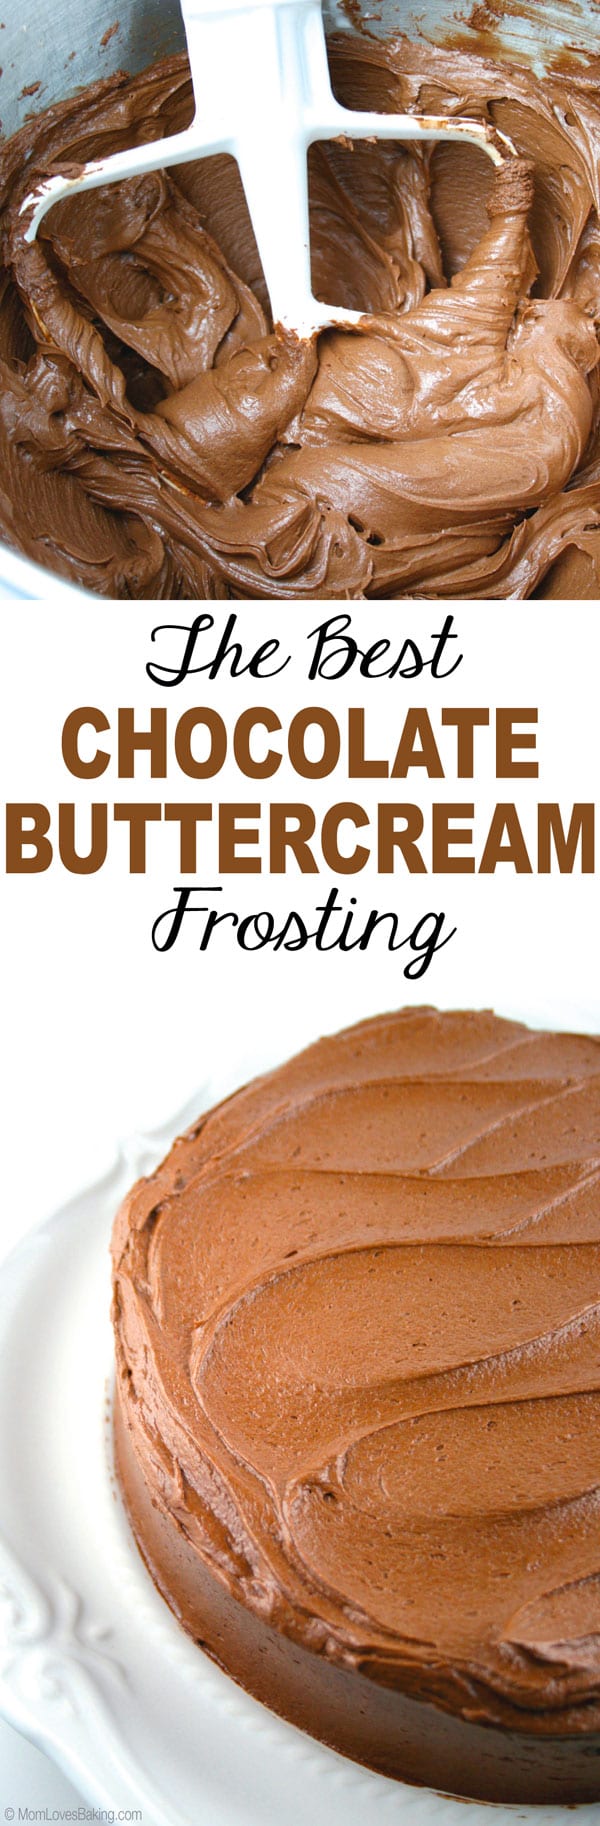 The best chocolate buttercream frosting 